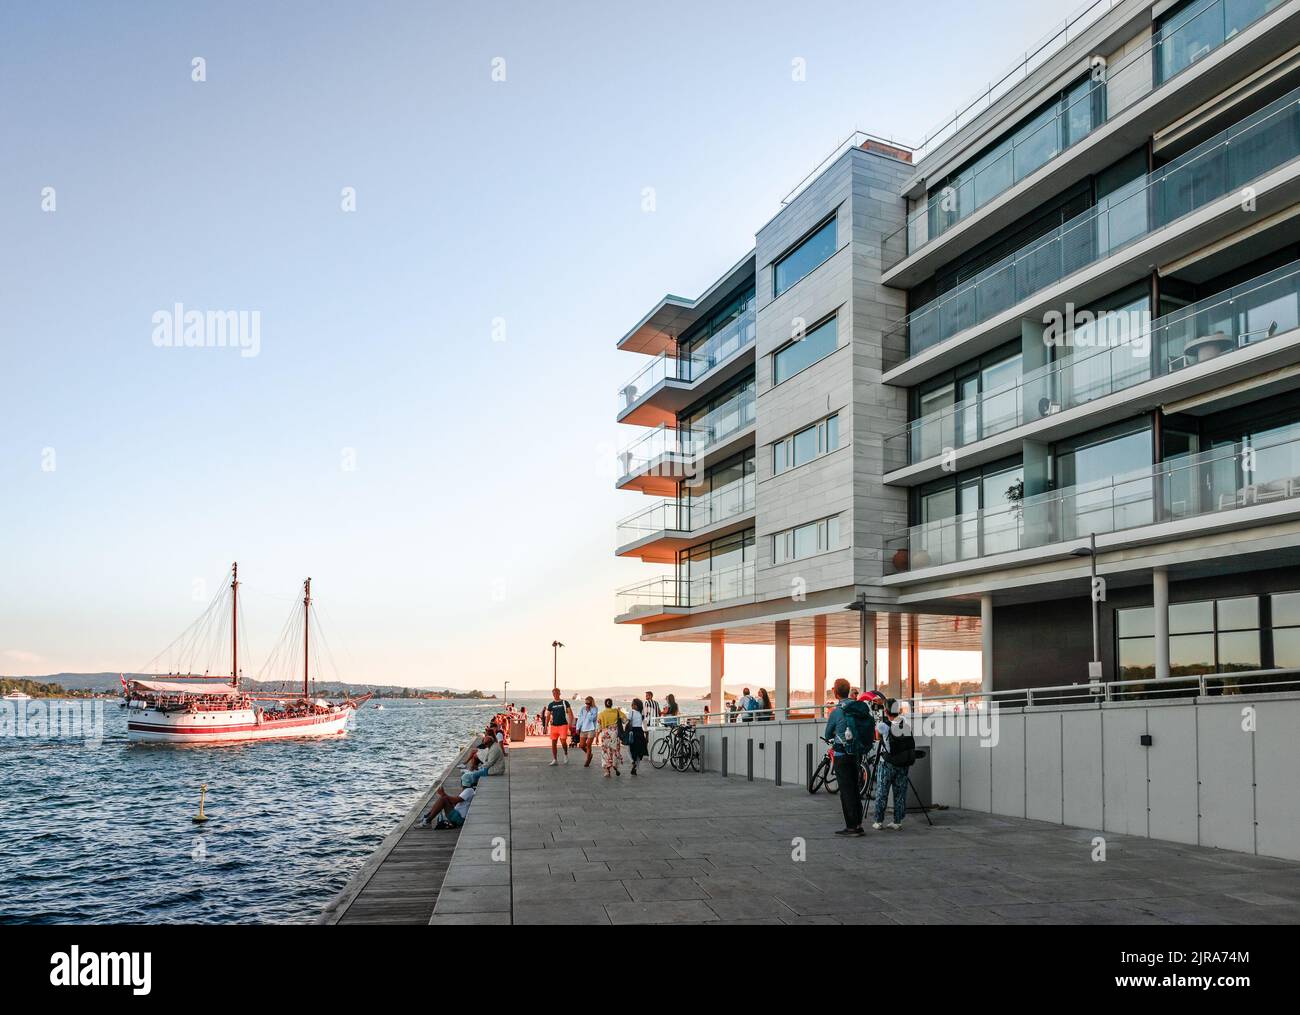 The waterfront of Tjuvholmen, Olso, Norway at sunset, with modern residential buildings facing the sea and a cruising boat in the background. Stock Photo